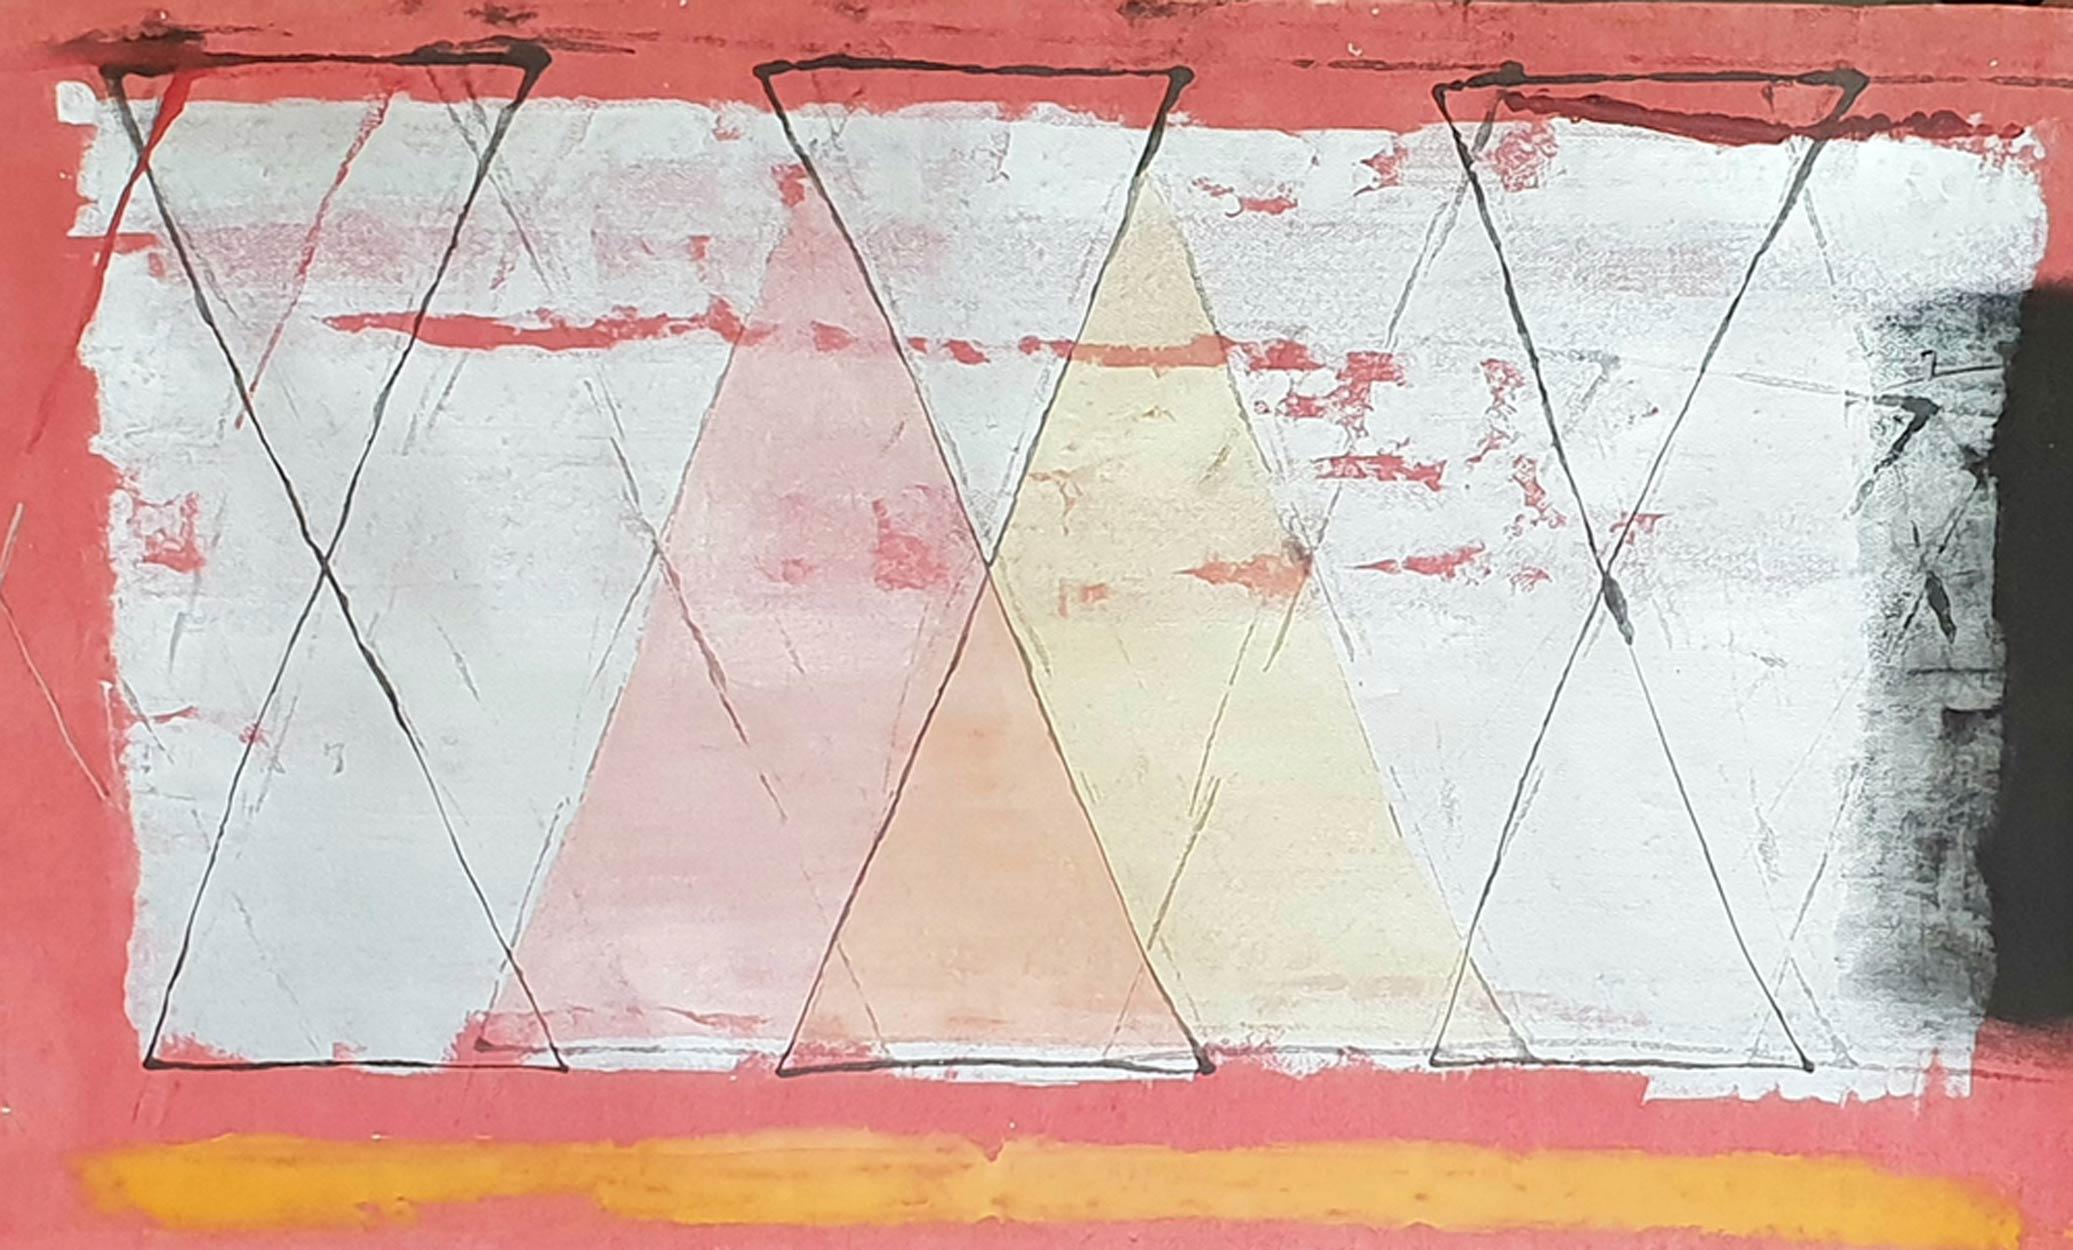 Abstract Painting, Mixed Media on paper, Red, Sliver, Yellow colors "In Stock" - Mixed Media Art by S. Harsha Vardhana